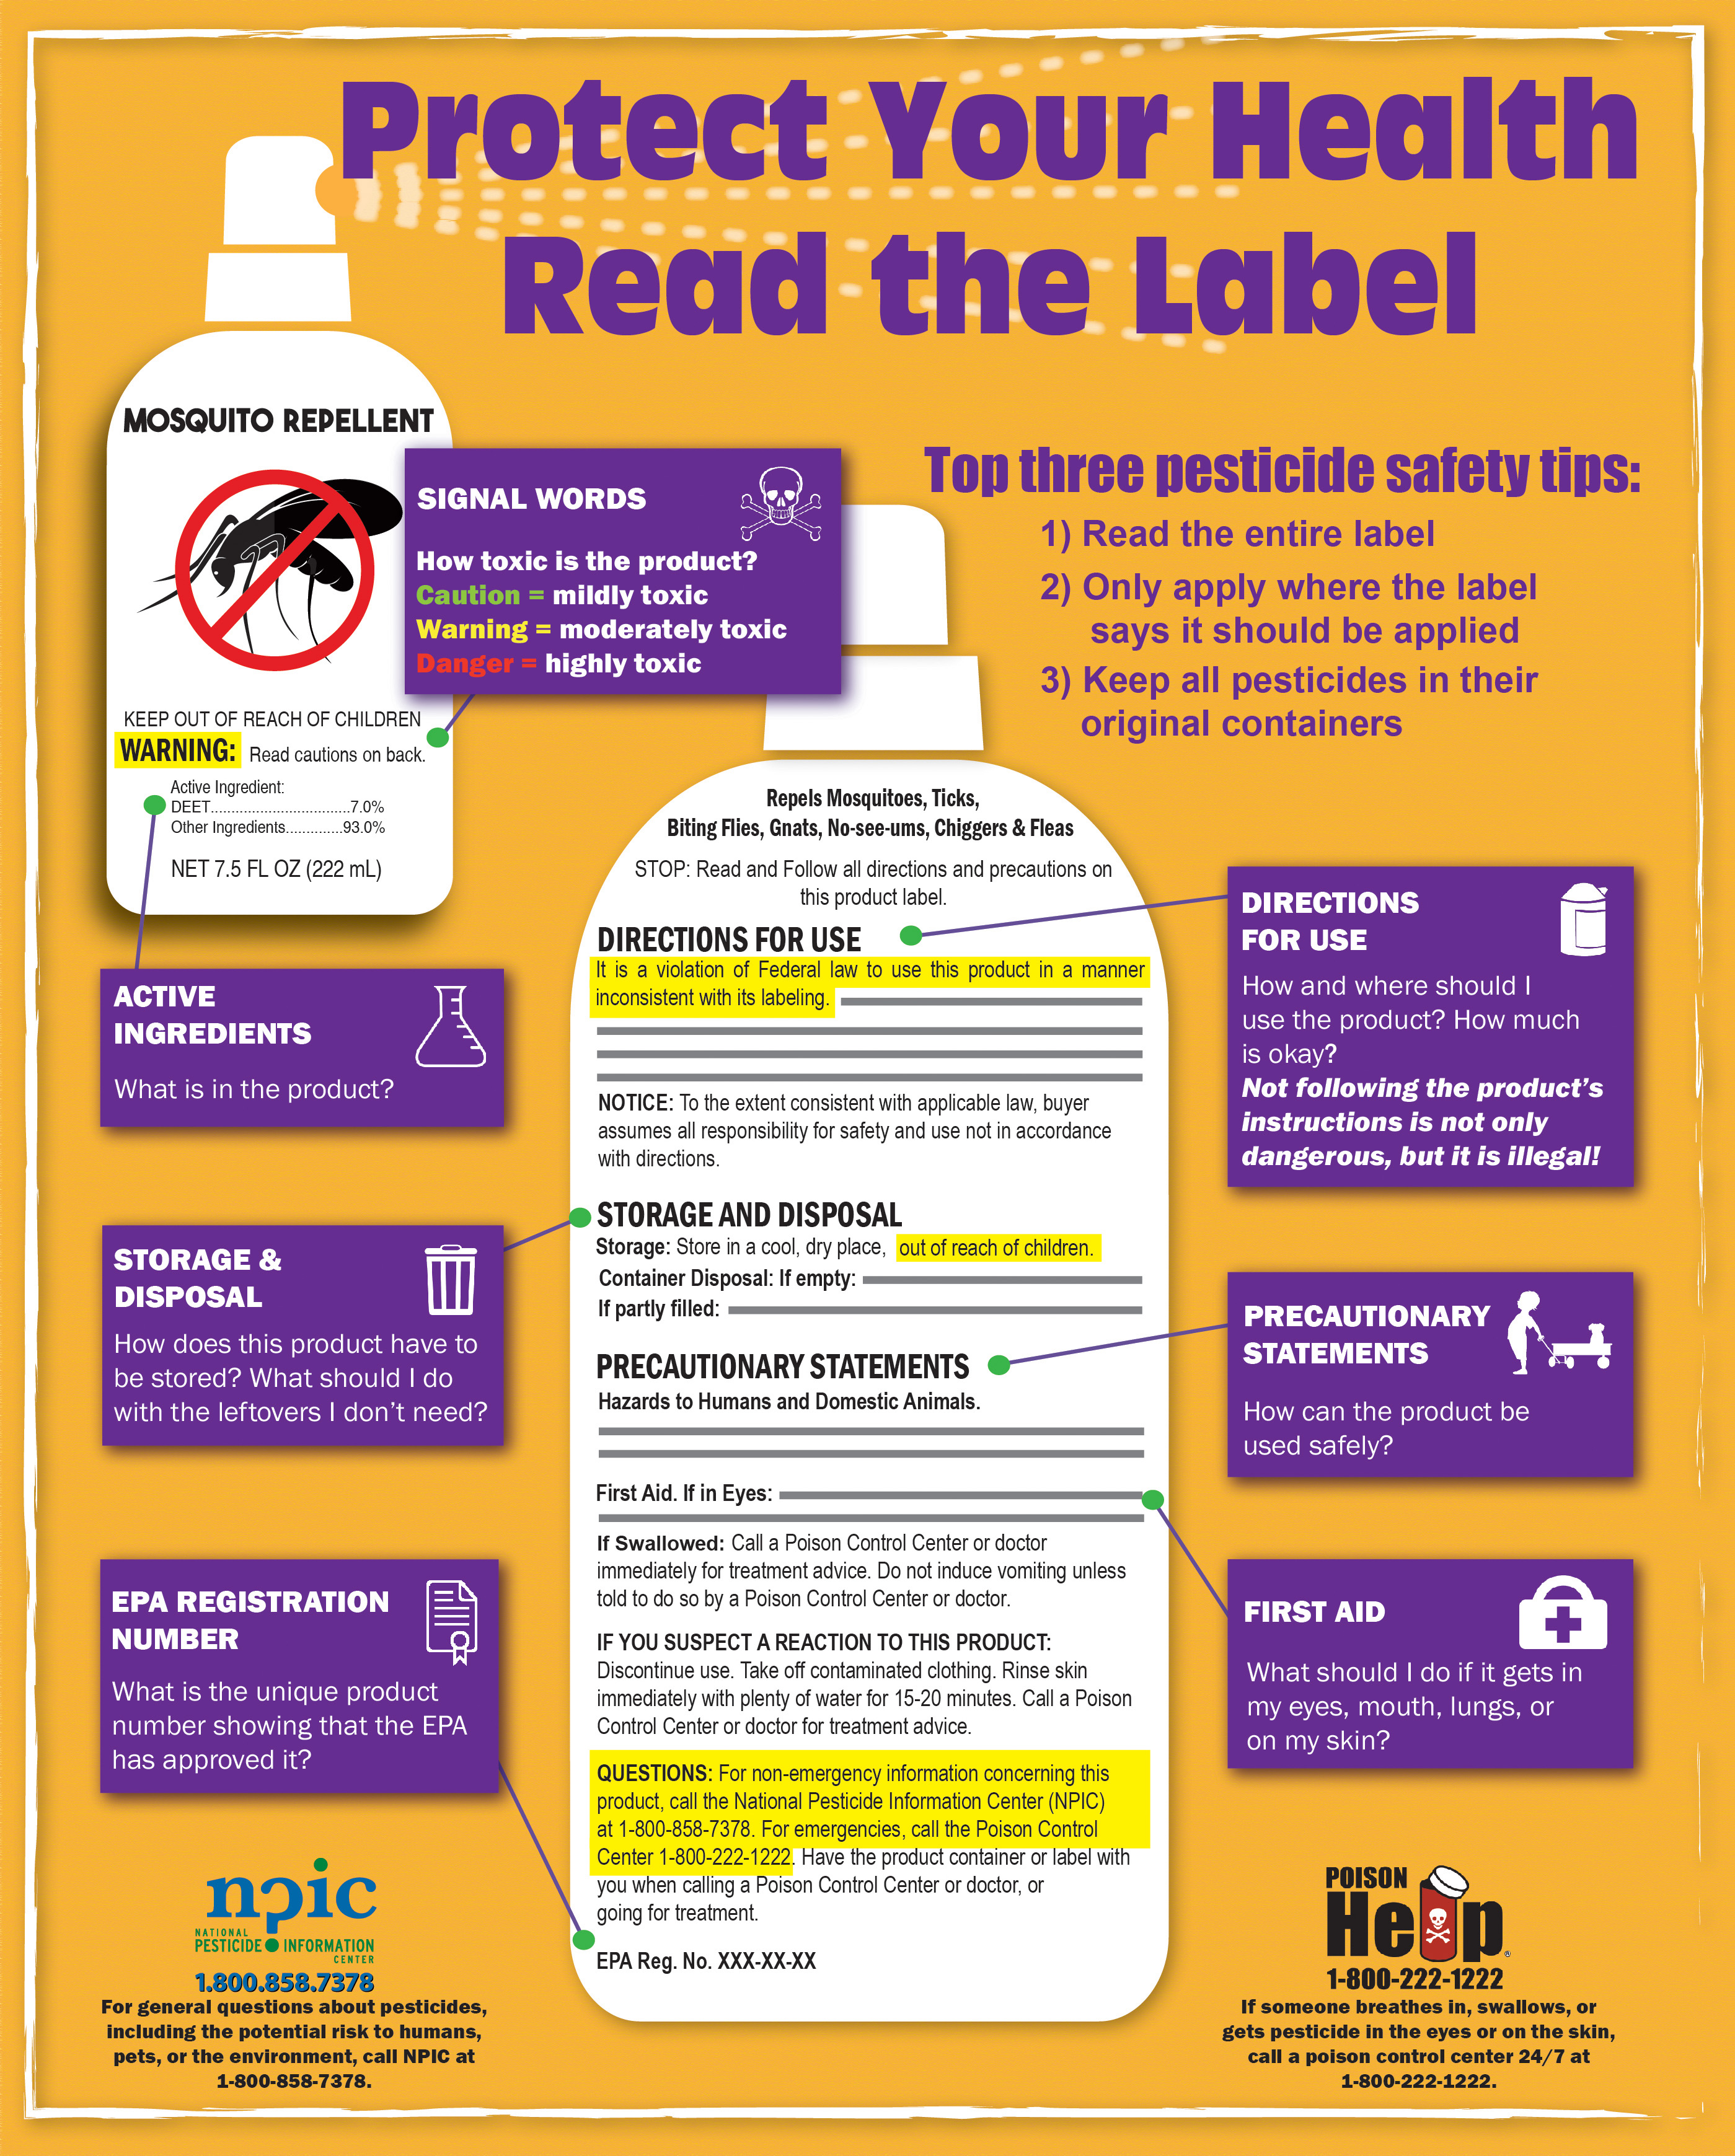 Guide to reading a pesticide label